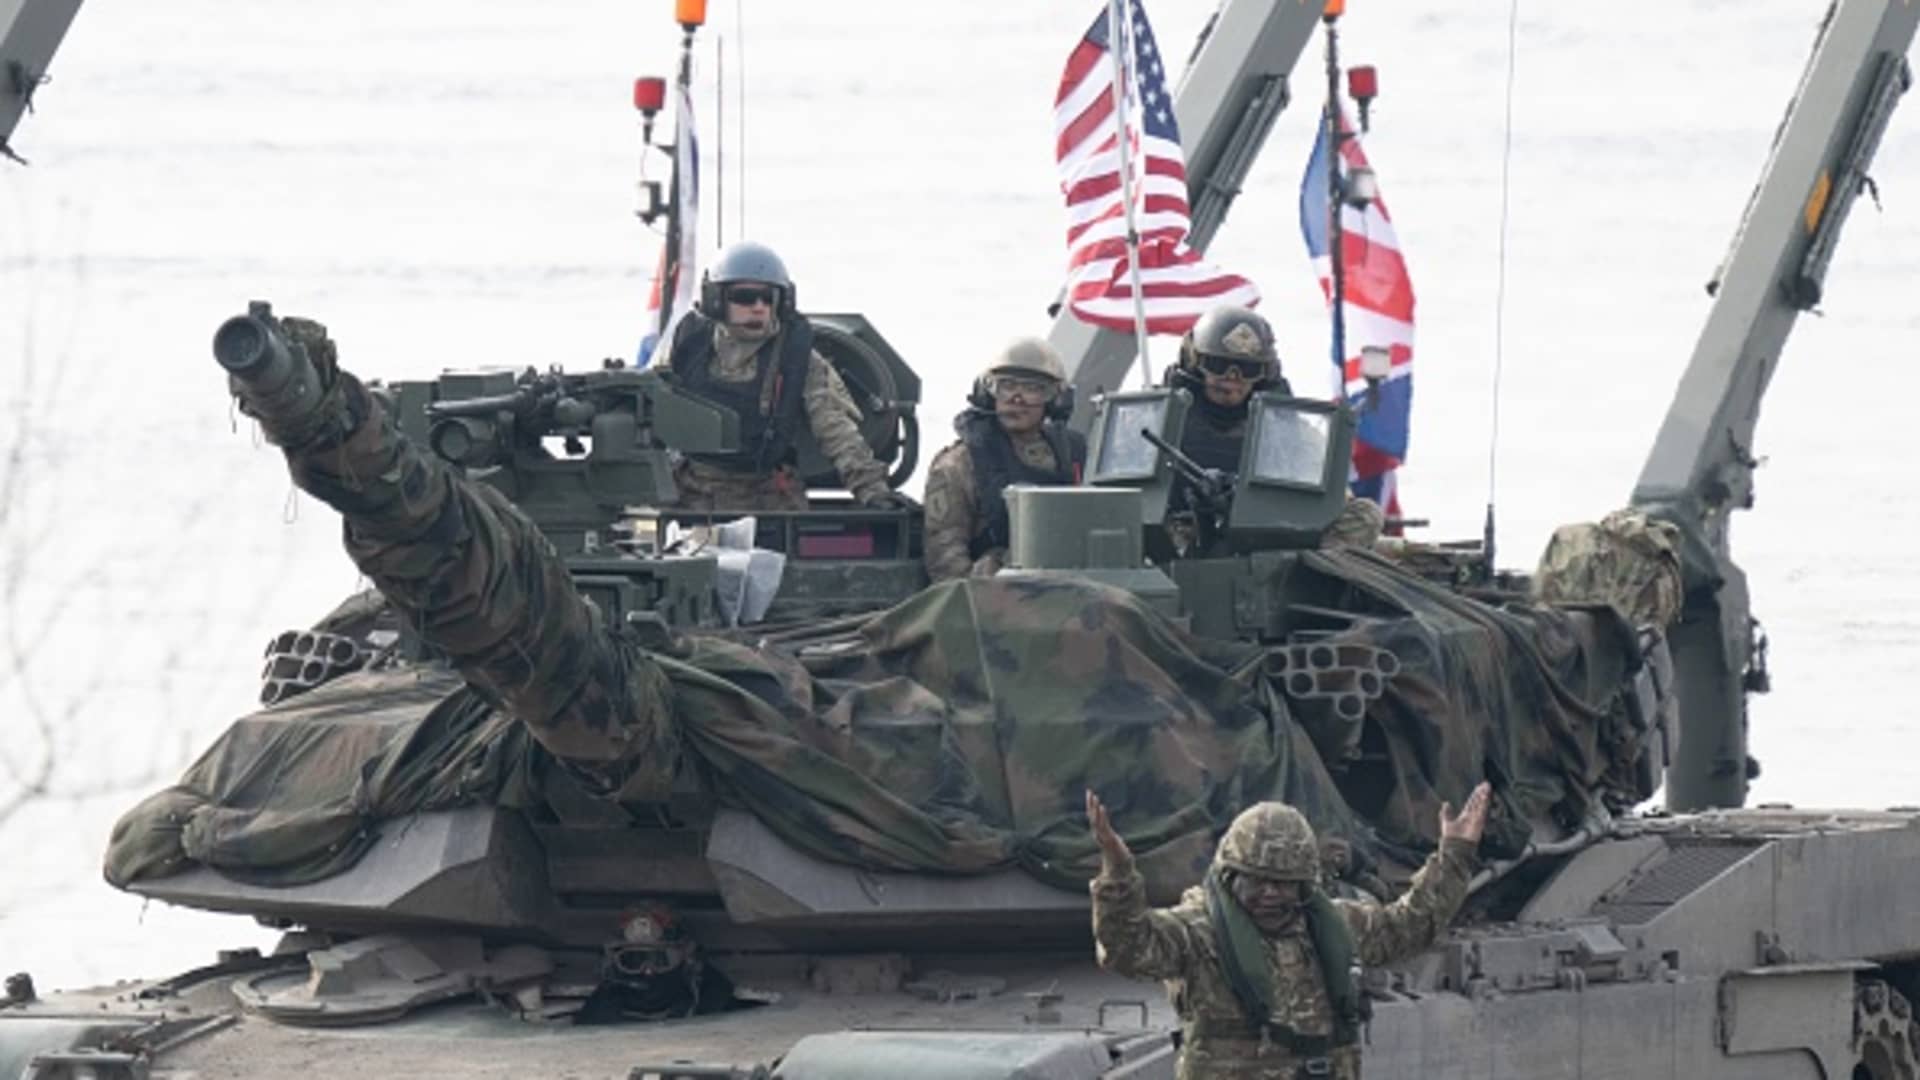 US Army soldiers are taking part in a joint military exercise with forces from several NATO countries on the Vistula.